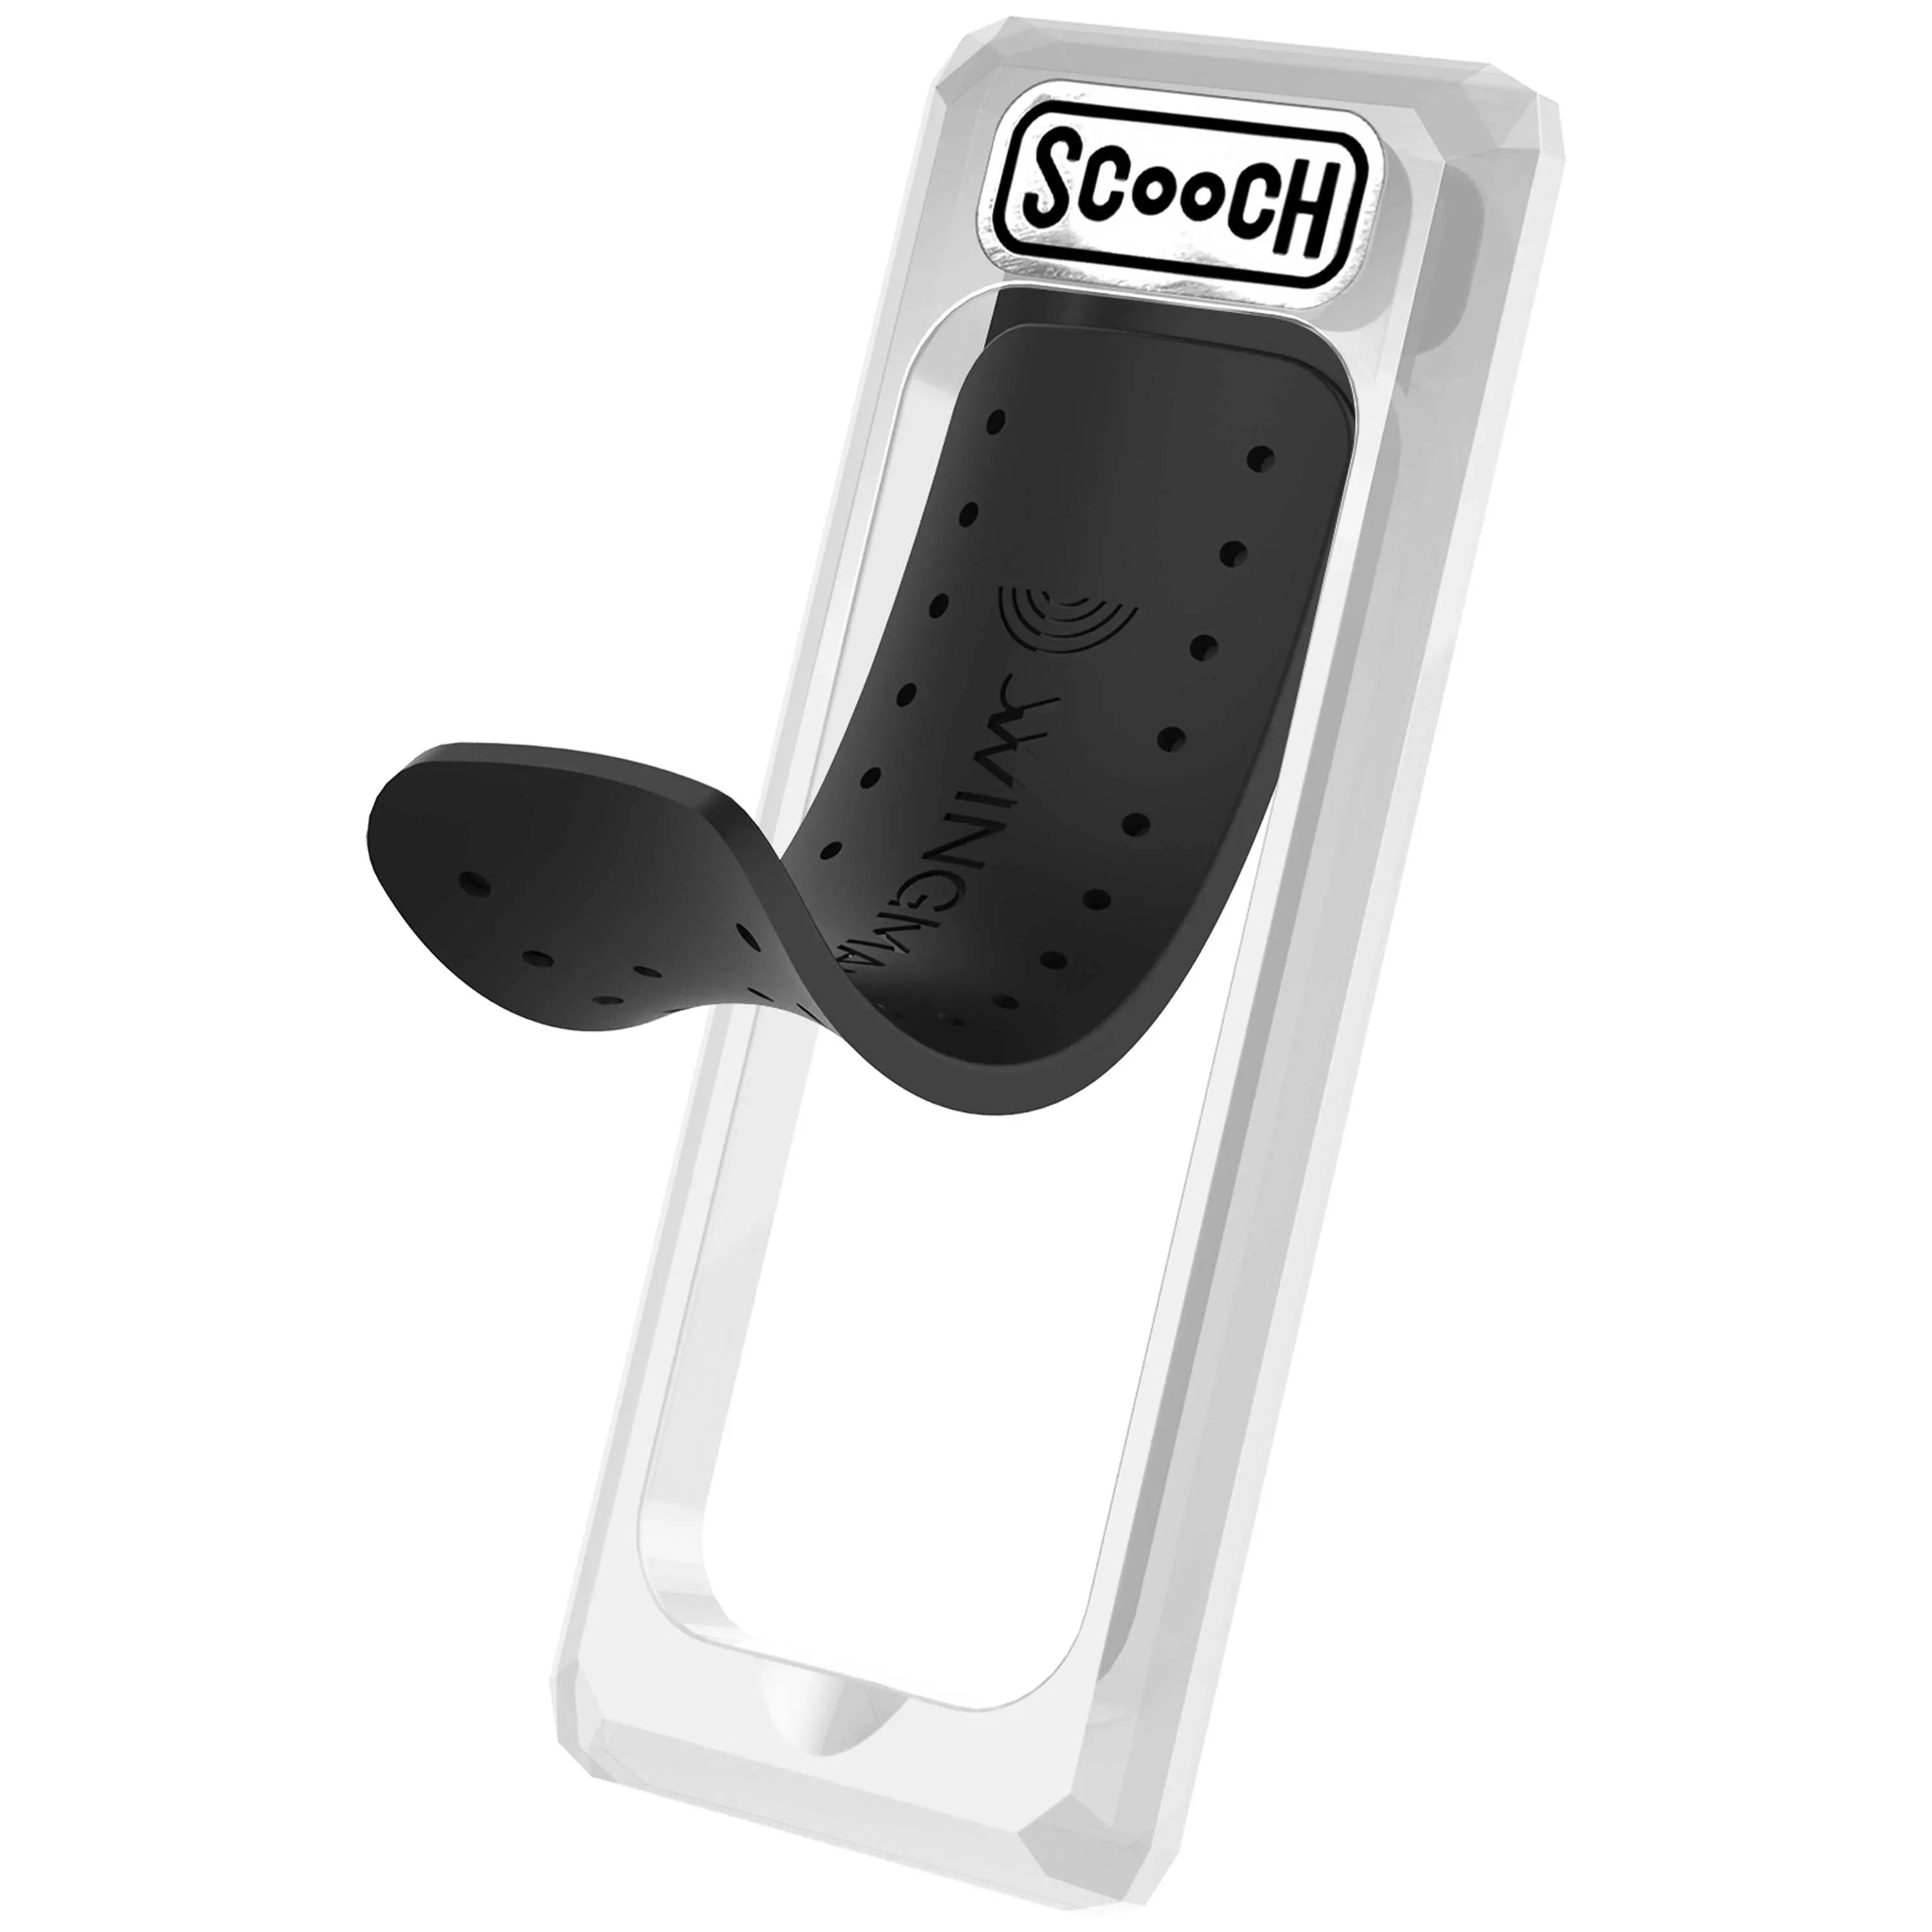 Scooch-Wingback - Pop Out Kickstand & Grip for Any Phone Case-